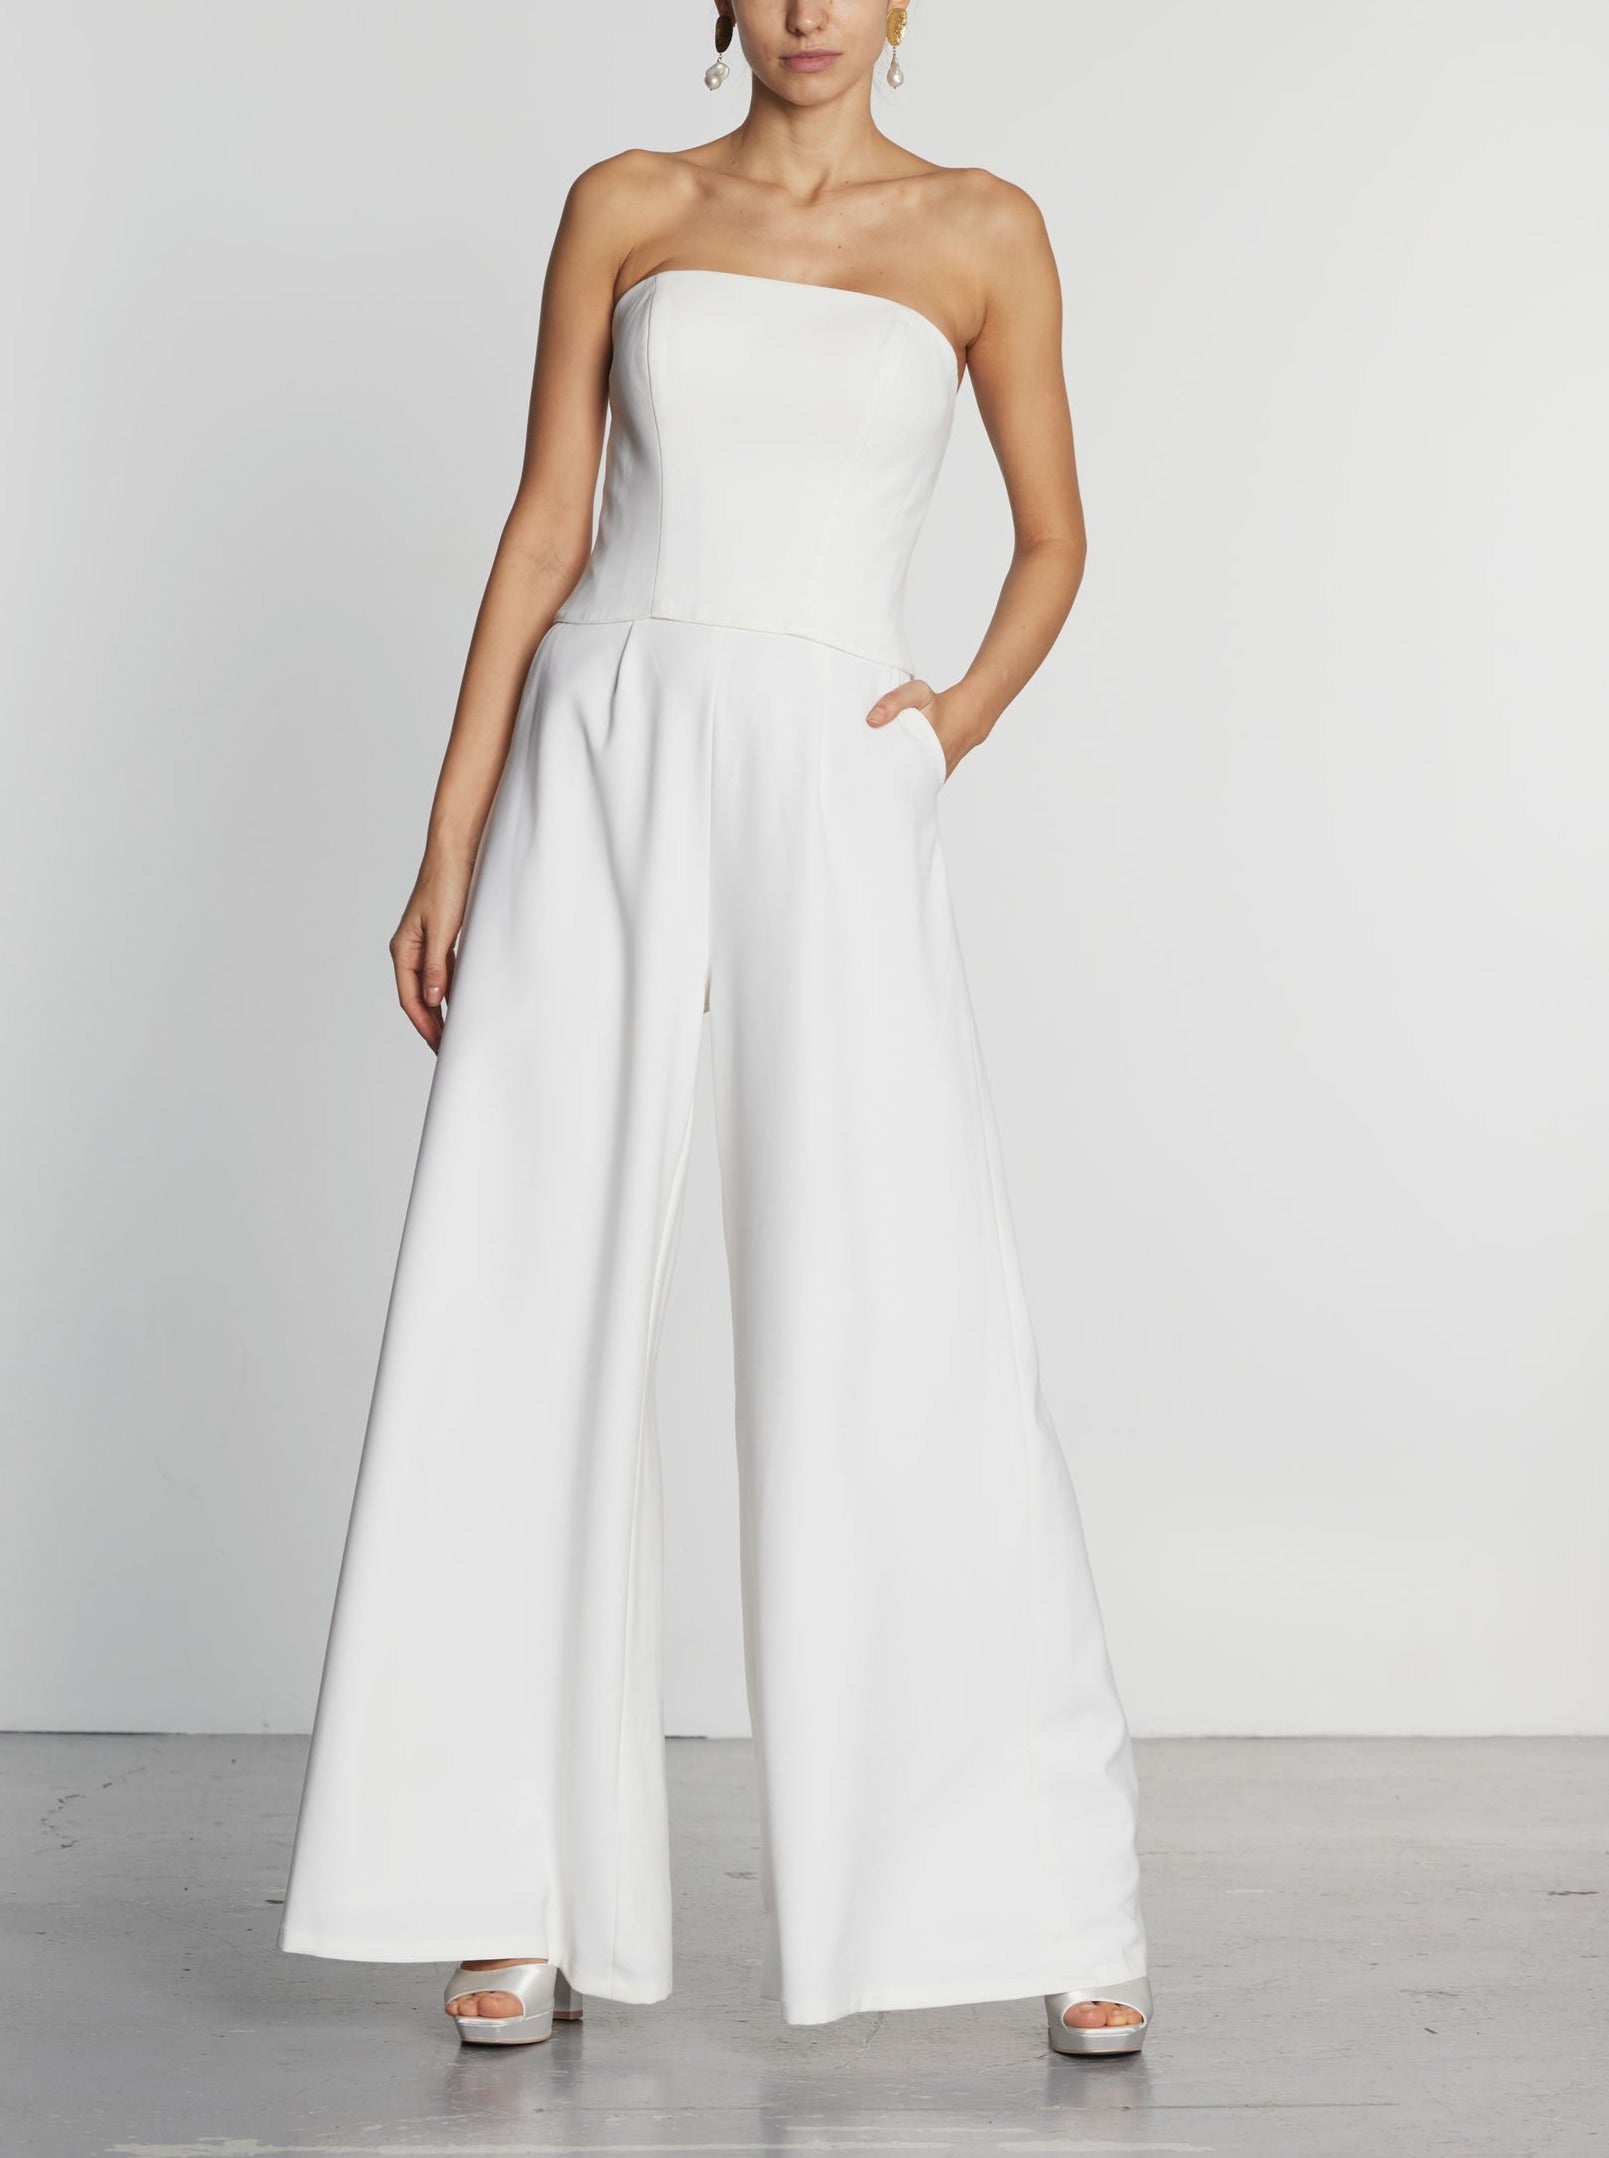 This Casablanca corset and trouser co ord is the perfect wedding outfit for any modern bride